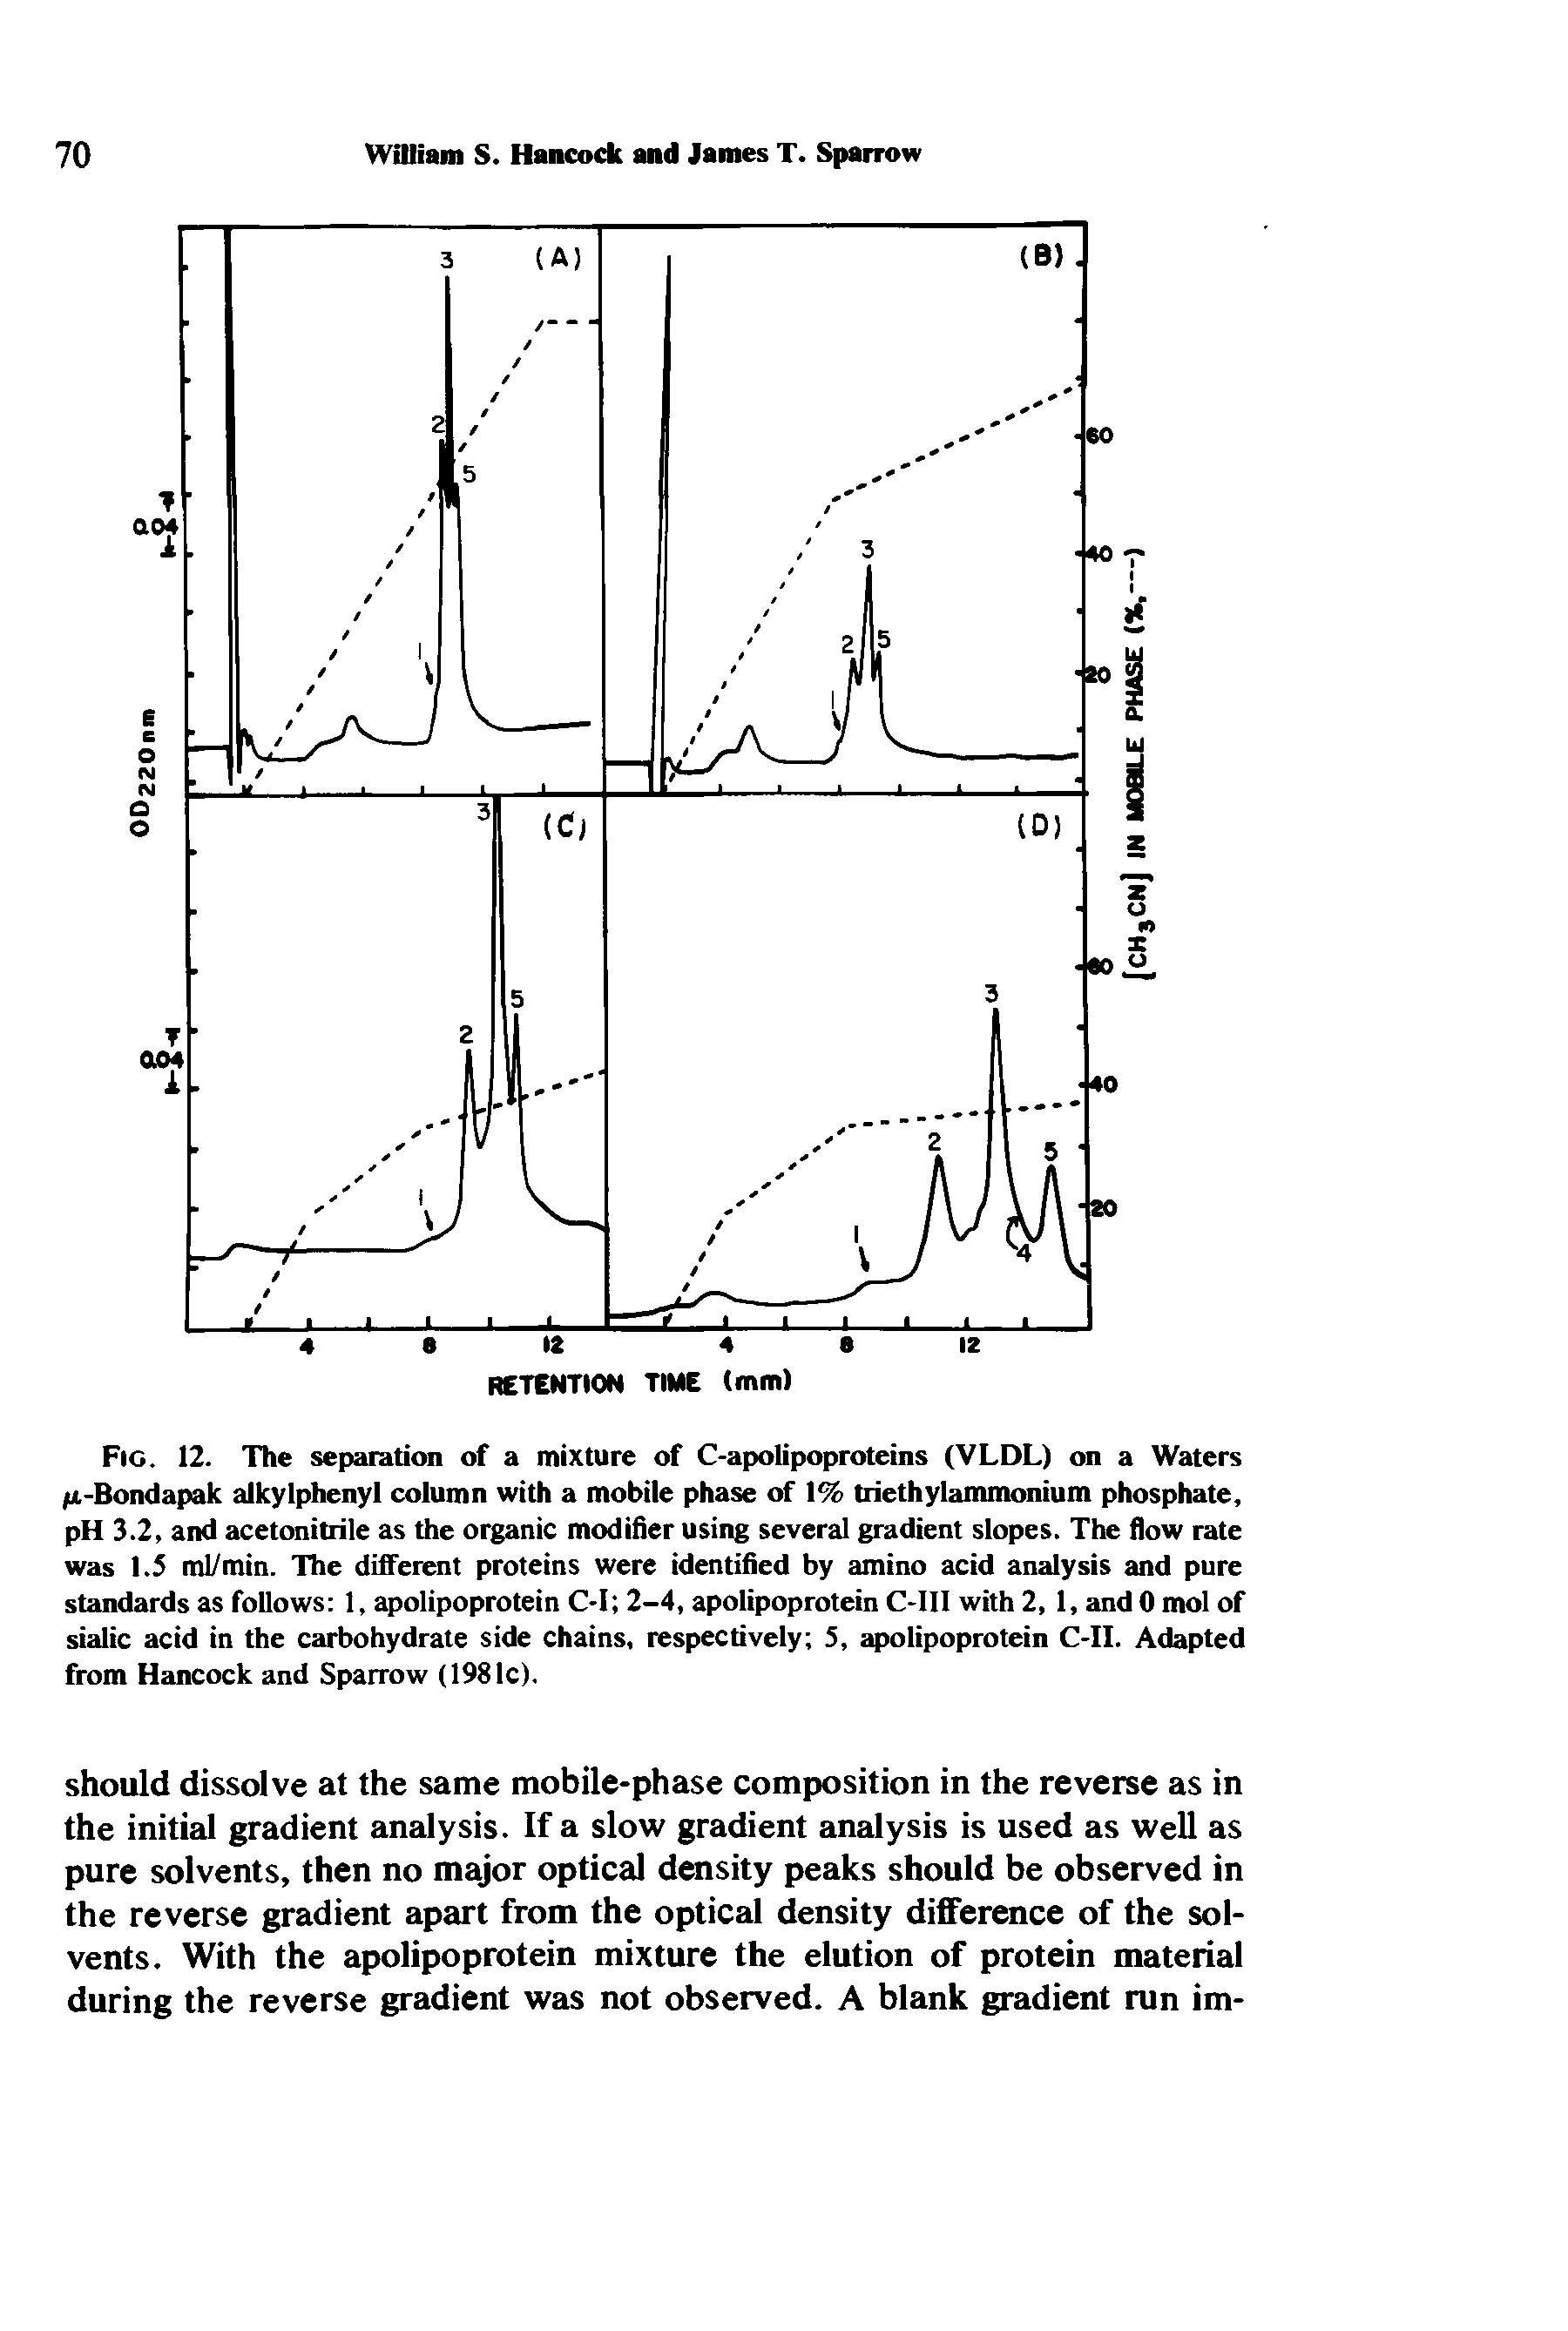 Fig. 12. The separation of a mixture of C-apolipoproteins (VLDL) on a Waters fi-Bondapak alkylphenyl column with a mobile phase of 1% triethylammcmium phosphate, pH 3.2, and acetonitrile as the organic modifier using several gradient slopes. The flow rate was 1.5 ml/min. The different proteins were identified by amino acid analysis and pure standards as follows 1, olipoprotein C-I 2-4, apolipoprotein C-111 with 2,1, and 0 mol of sialic acid in the carbohydrate side chains, respectively 5, apolipoprotein C-II. Adapted from Hancock and Sparrow (1981c).